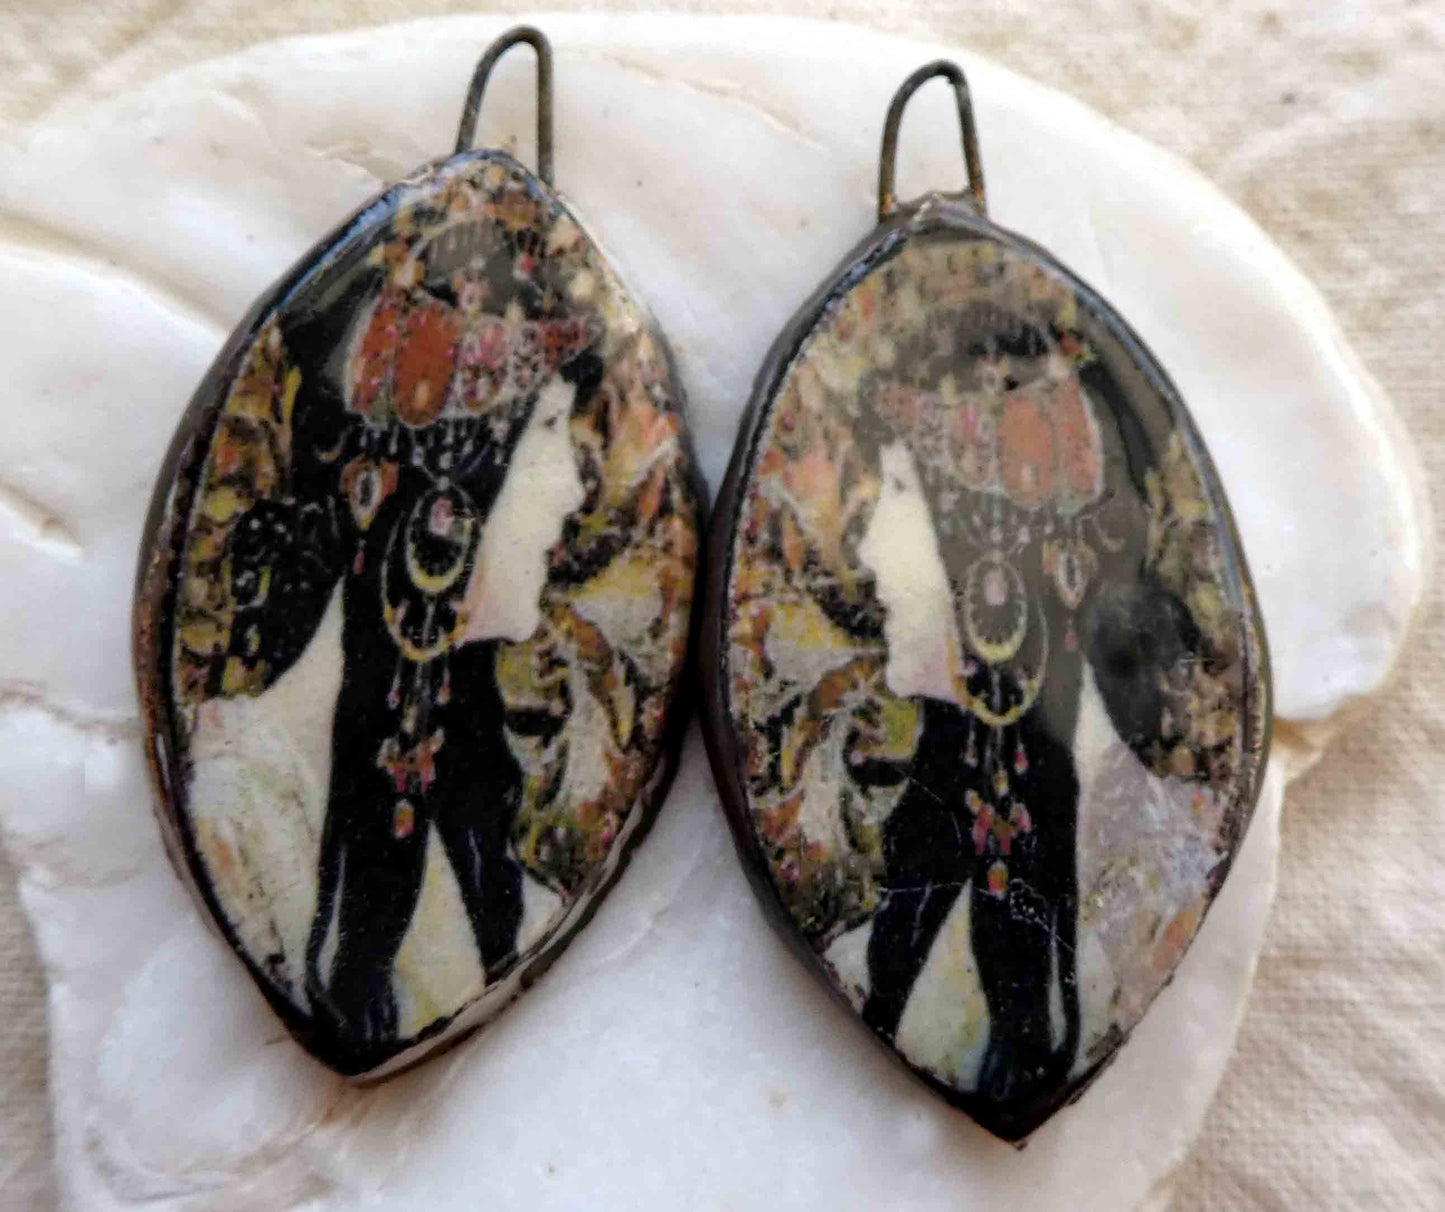 Ceramic Decal Mucha Earring Droppers #8